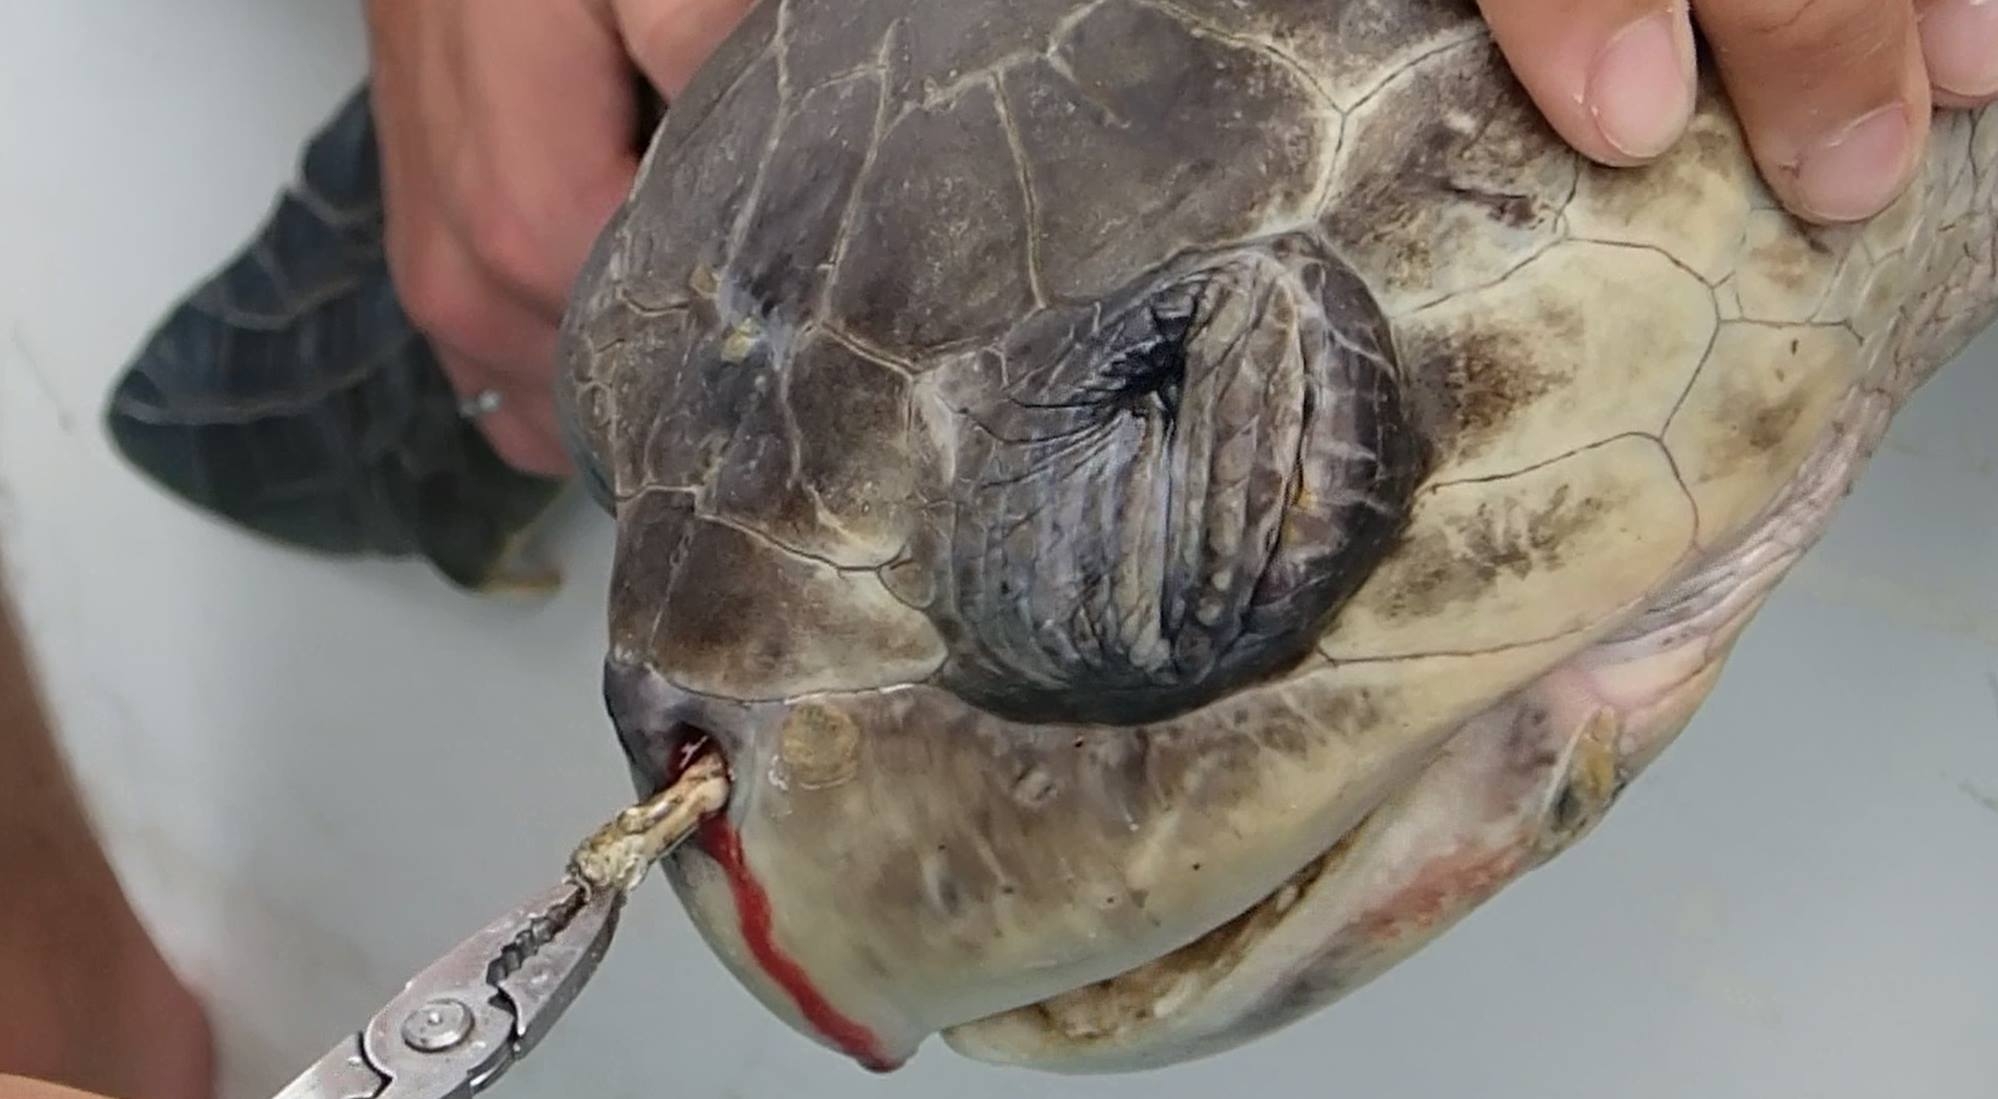 the turtle that became the anti-plastic straw poster child — plastic pollution coalition